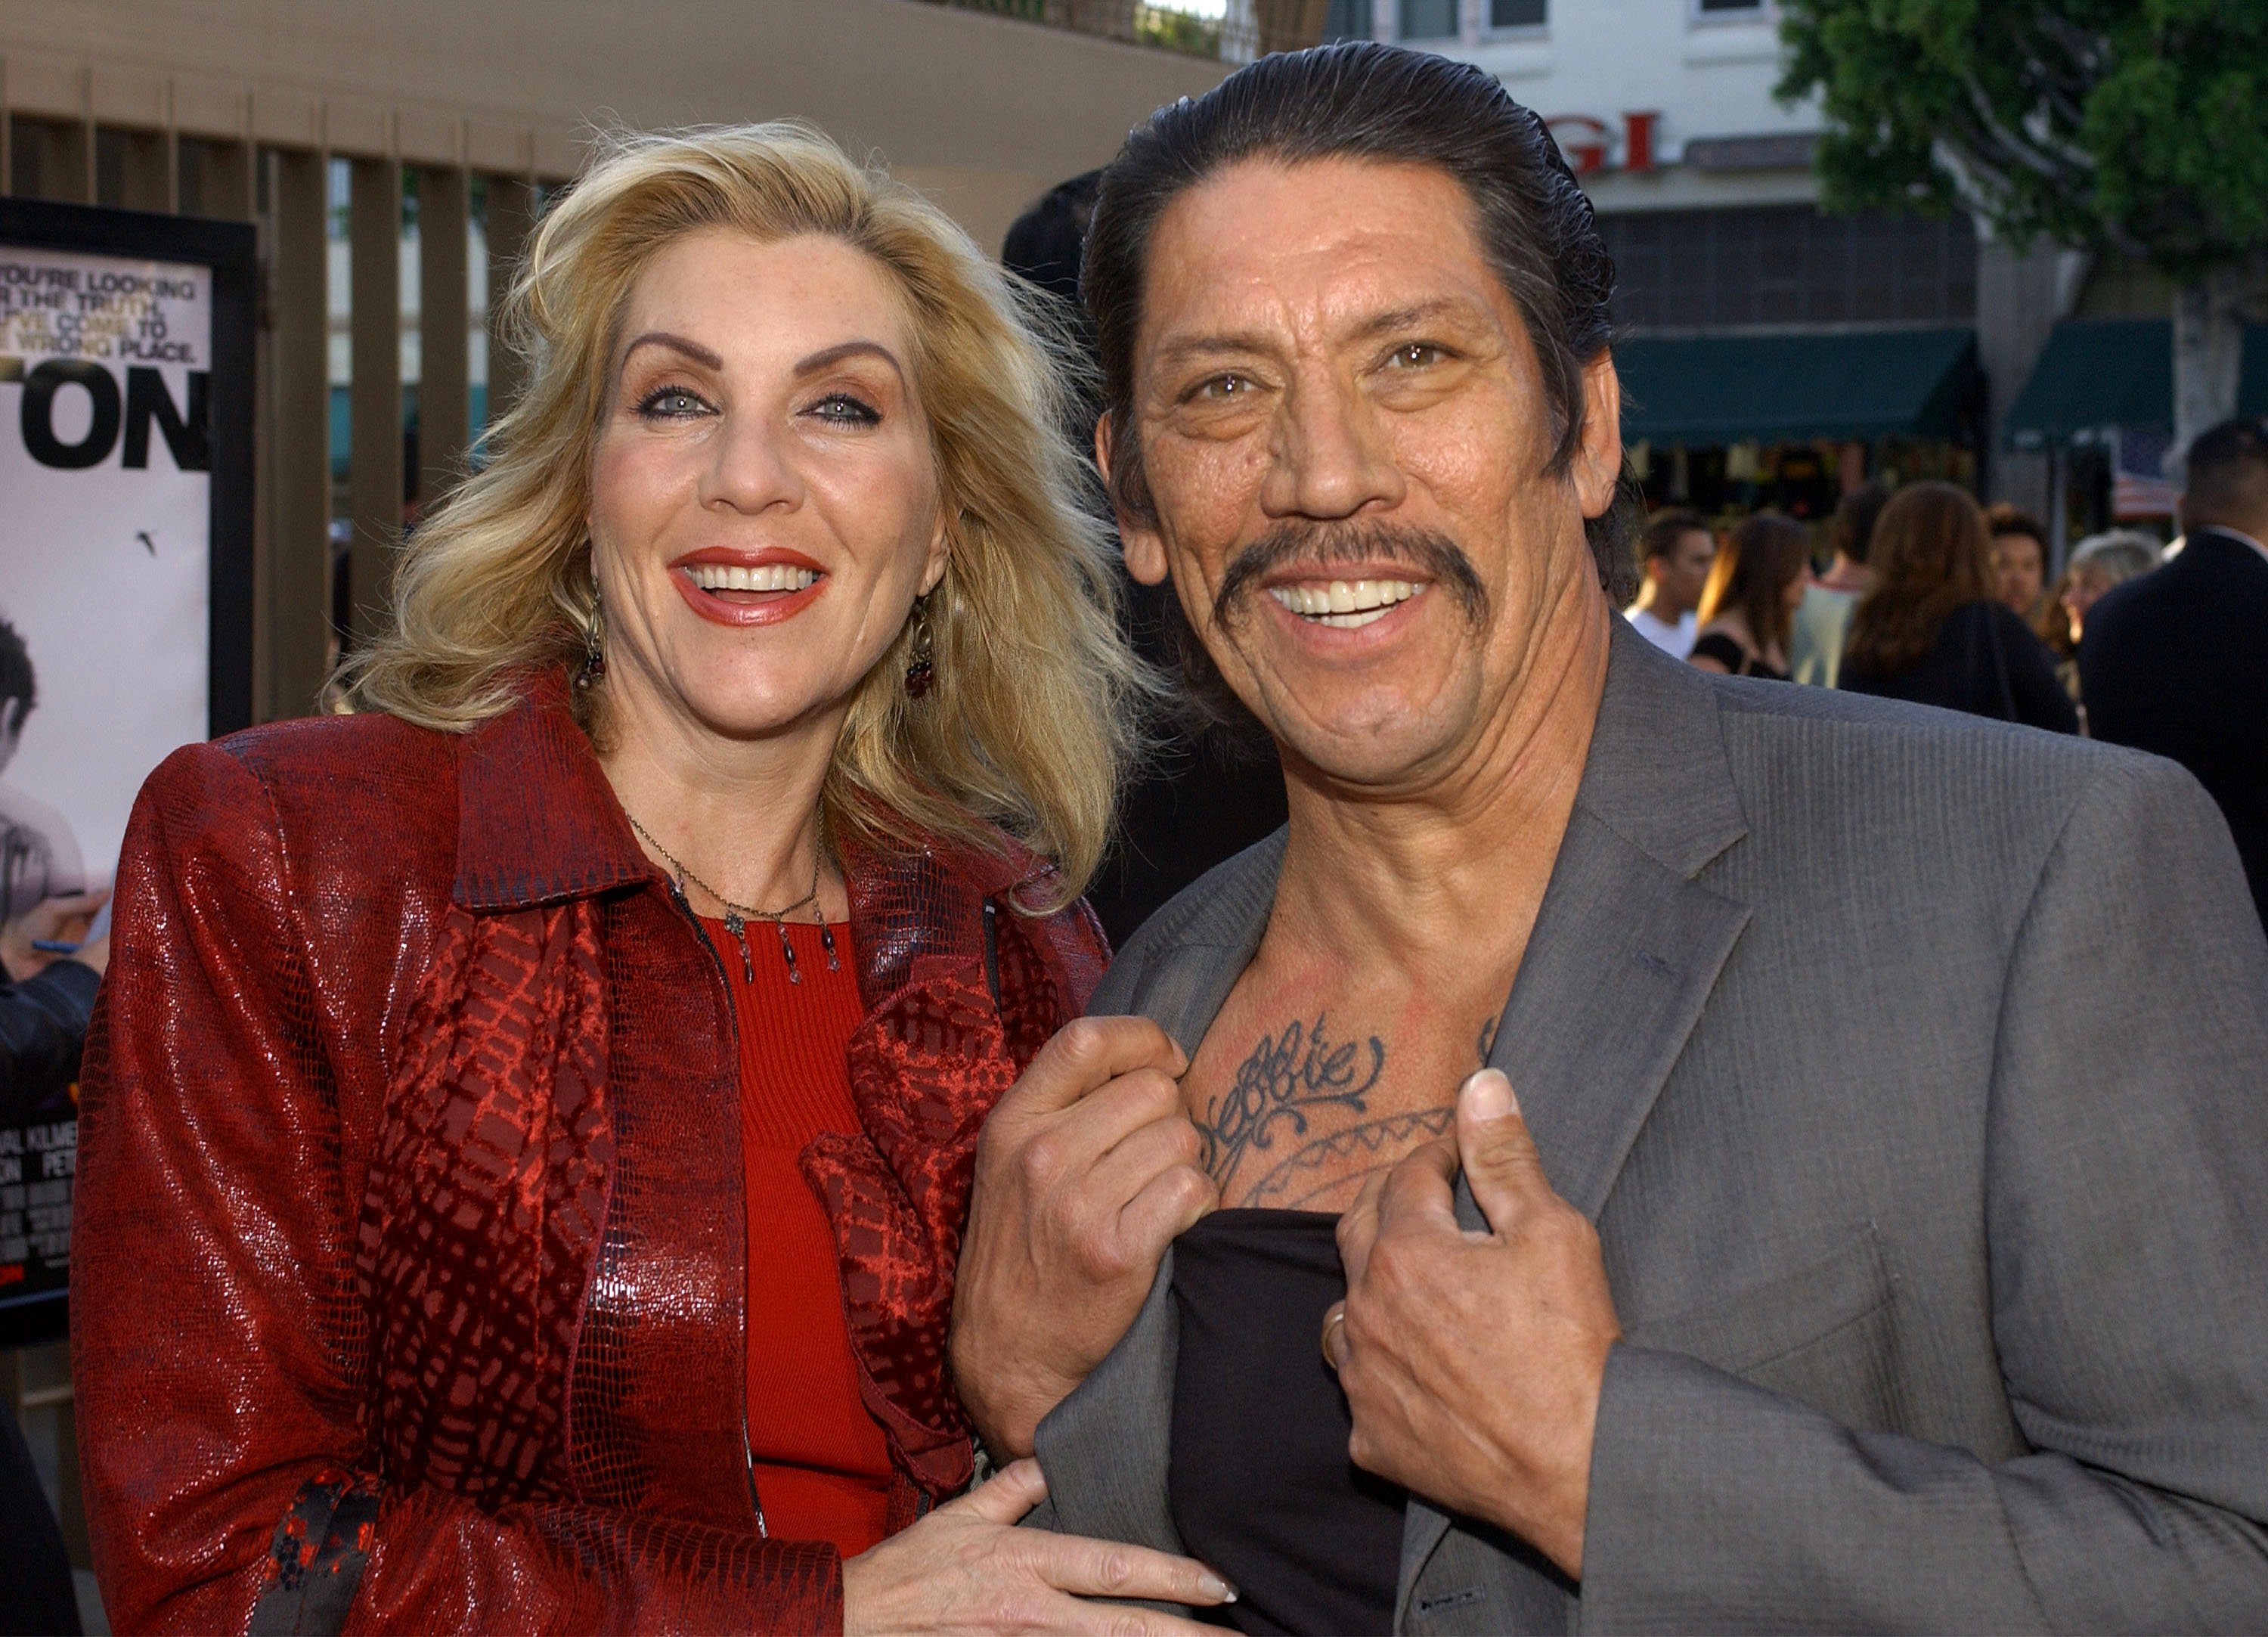 Actor Danny Trejo shows tattoo with name of his wife Debbie at the premiere of the film "The Salton Sea" April 23, 2002 at the Egyptian Theatre in Hollywood, CA. | Source: Getty Images